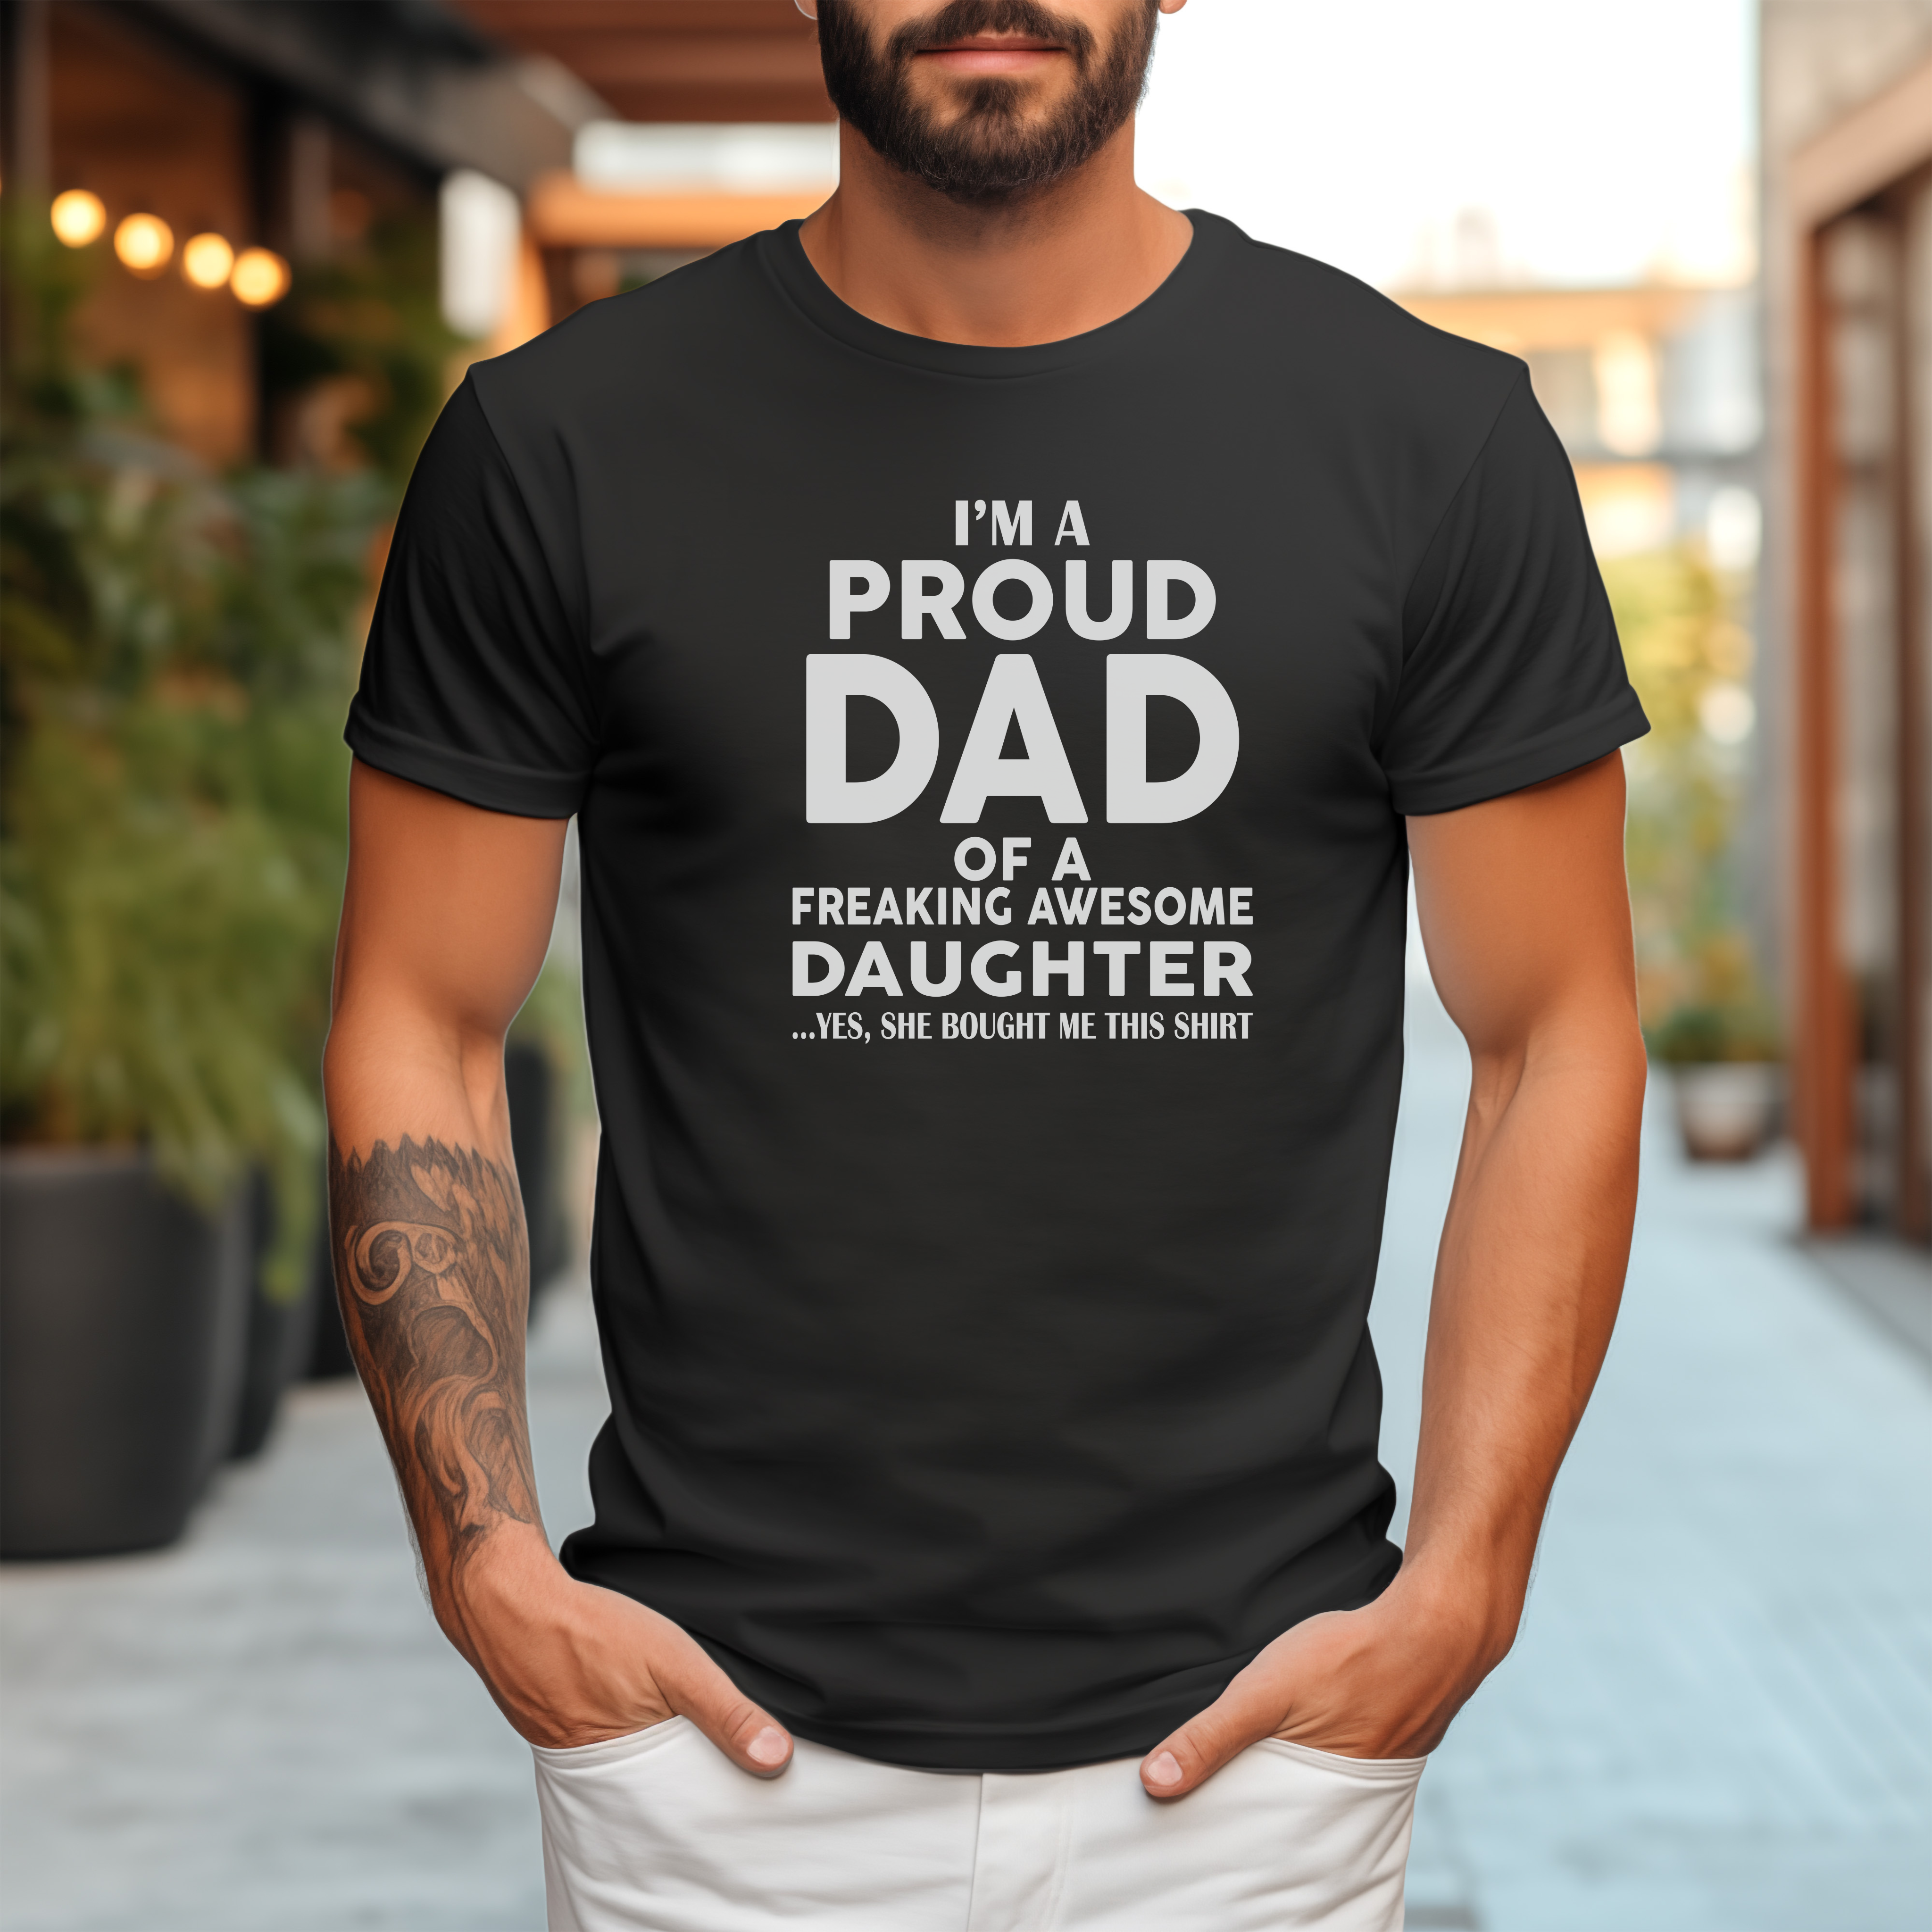 Proud Dad of an Awesome Daughter Tee